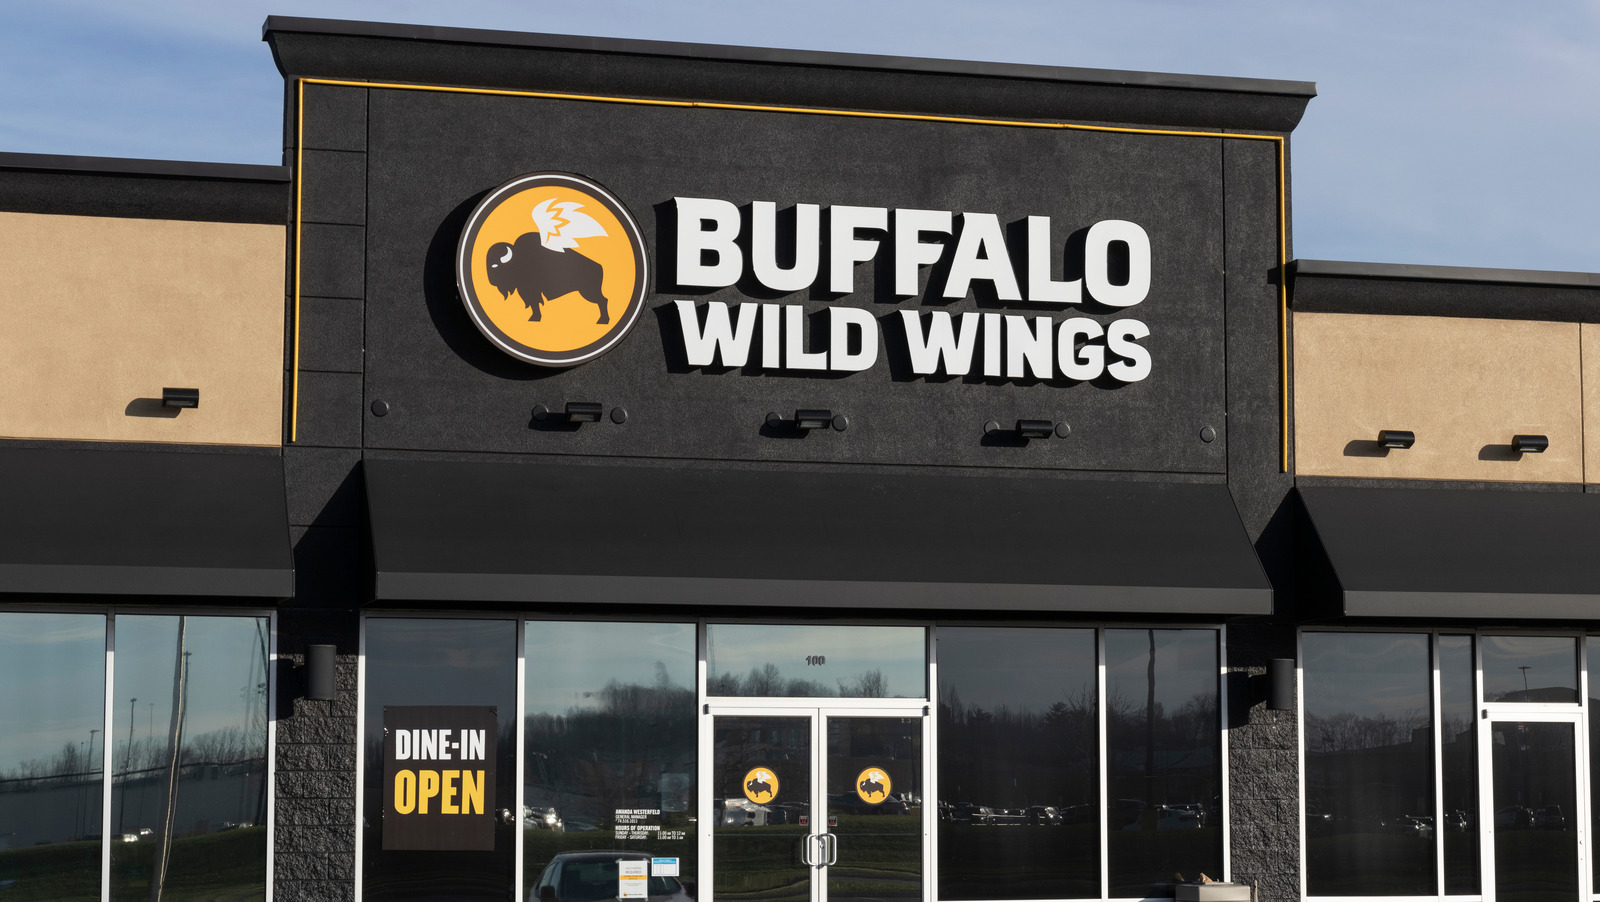 at se ortodoks ornament Here's How Buffalo Wild Wings Got Its Name